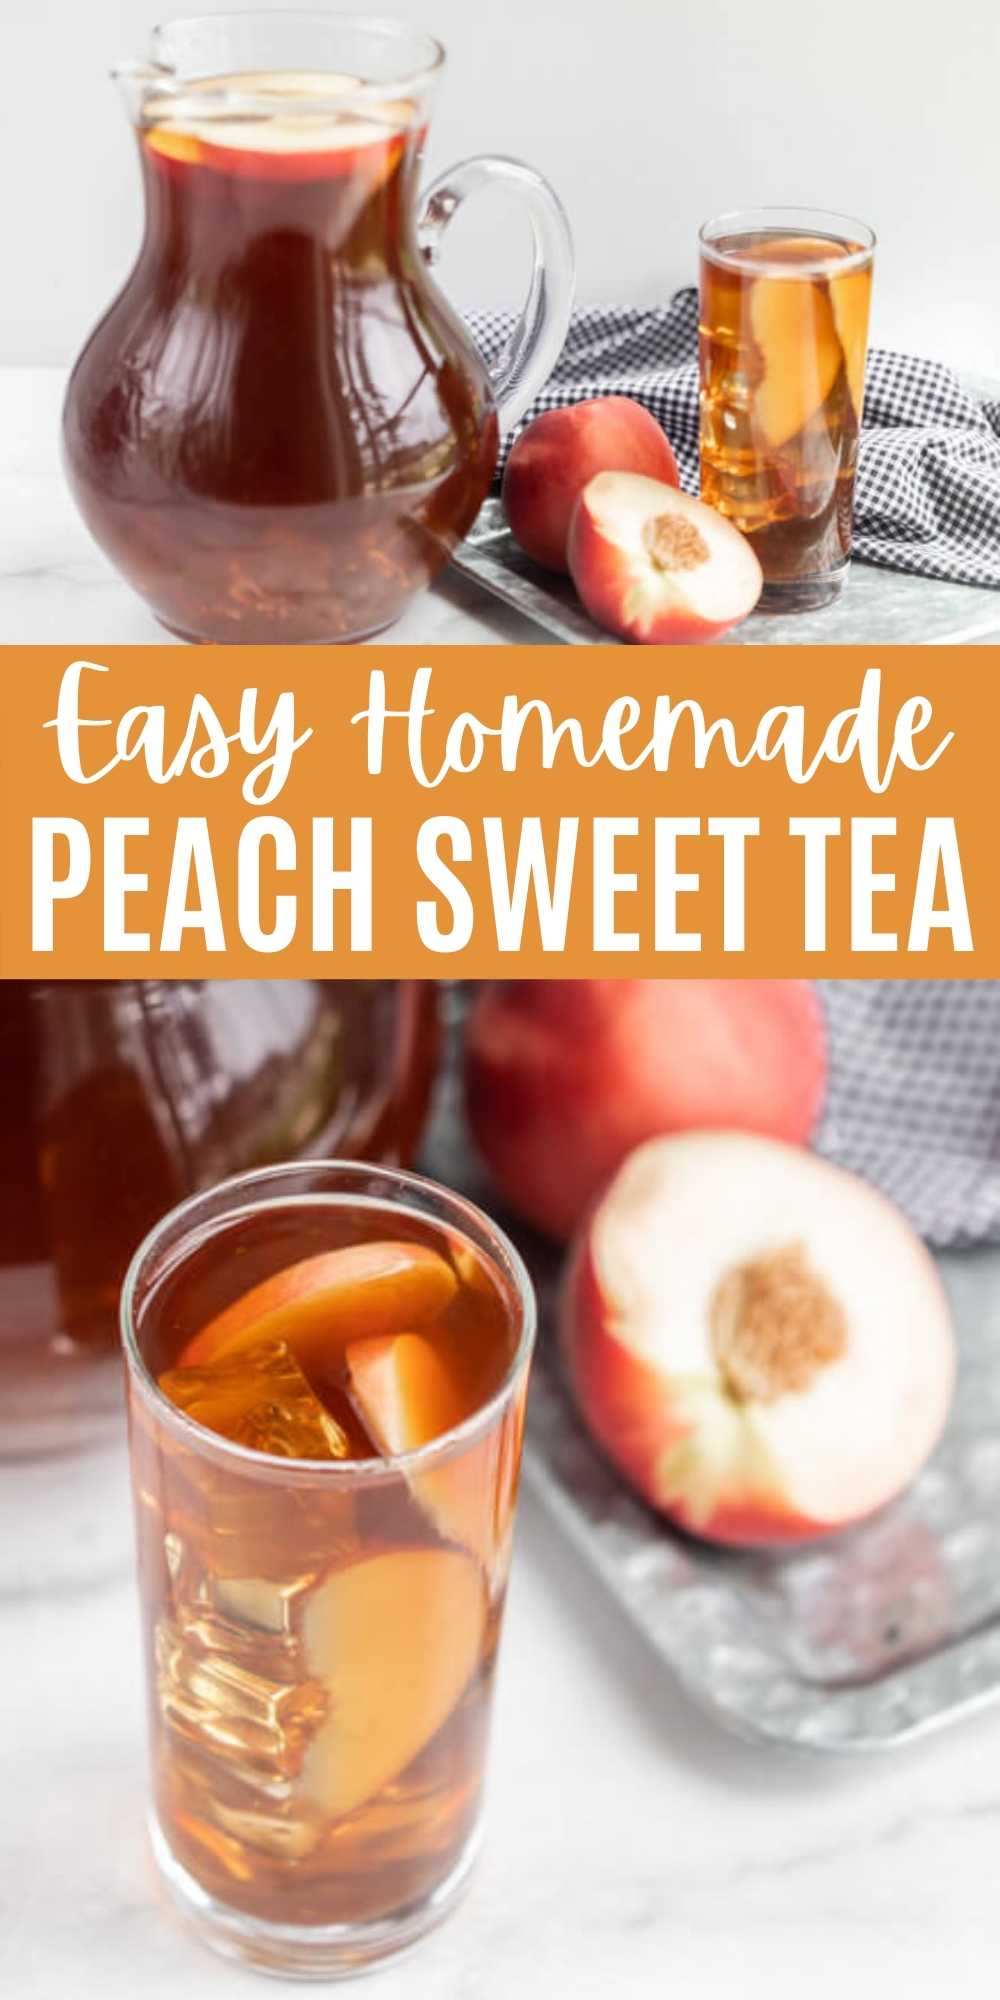 This refreshing Sweet Peach Tea recipe is easy to make and perfect for summer! It features an easy to make homemade peach syrup that makes every glass perfect every time!  Everyone will love this homemade peach tea recipe.  #eatingonadime #drinkrecipes #peachrecipes #tearecipes 
